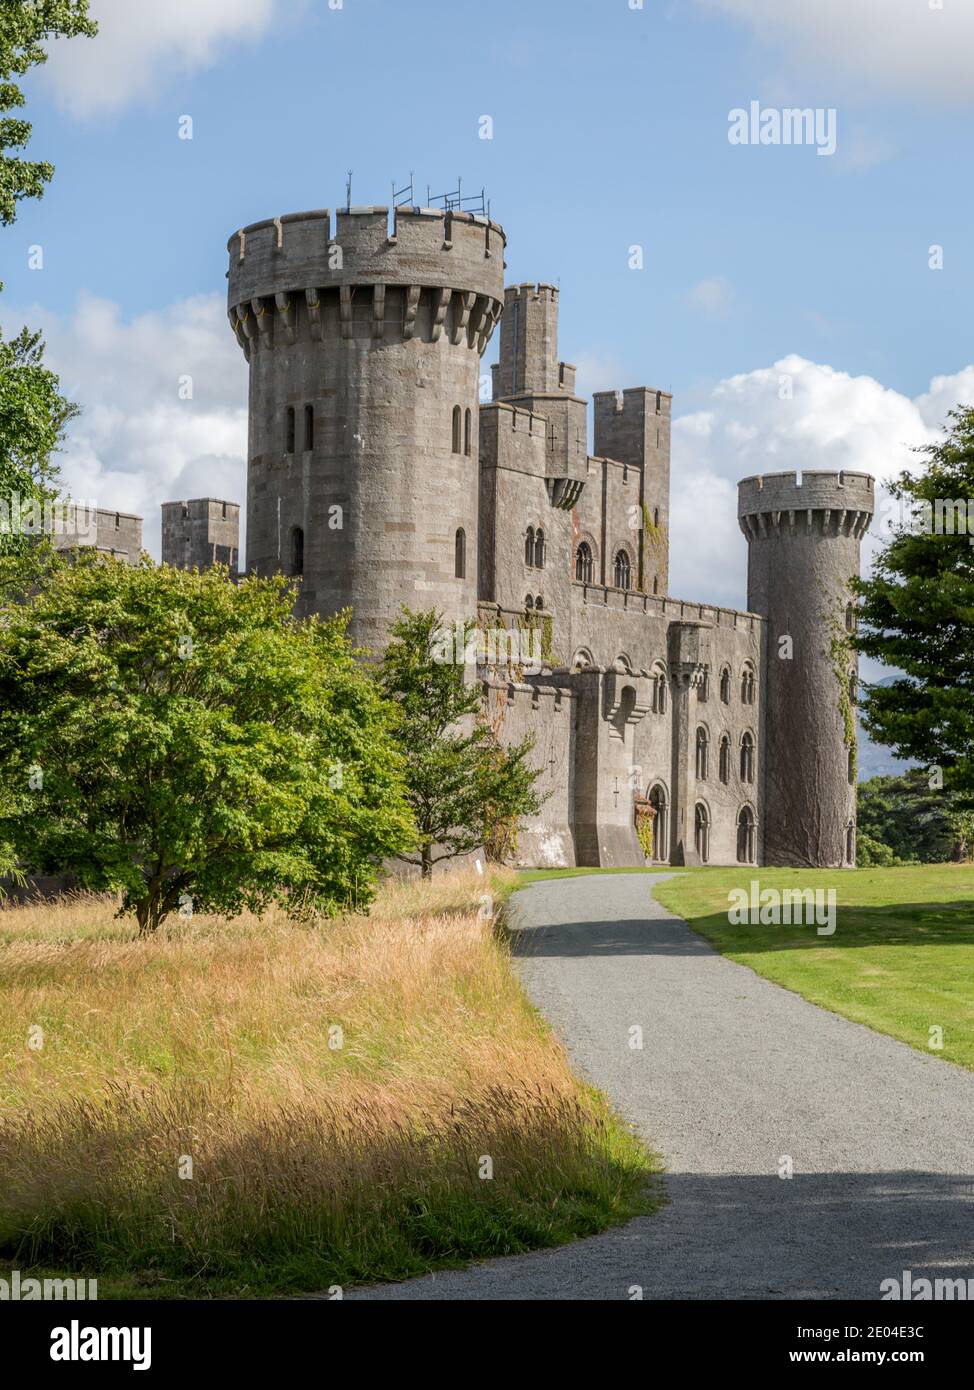 Penrhyn Castle in North Wales is a country house built in the form of a Norman castle. It was built in the 19th century between 1822 and 1837. Stock Photo